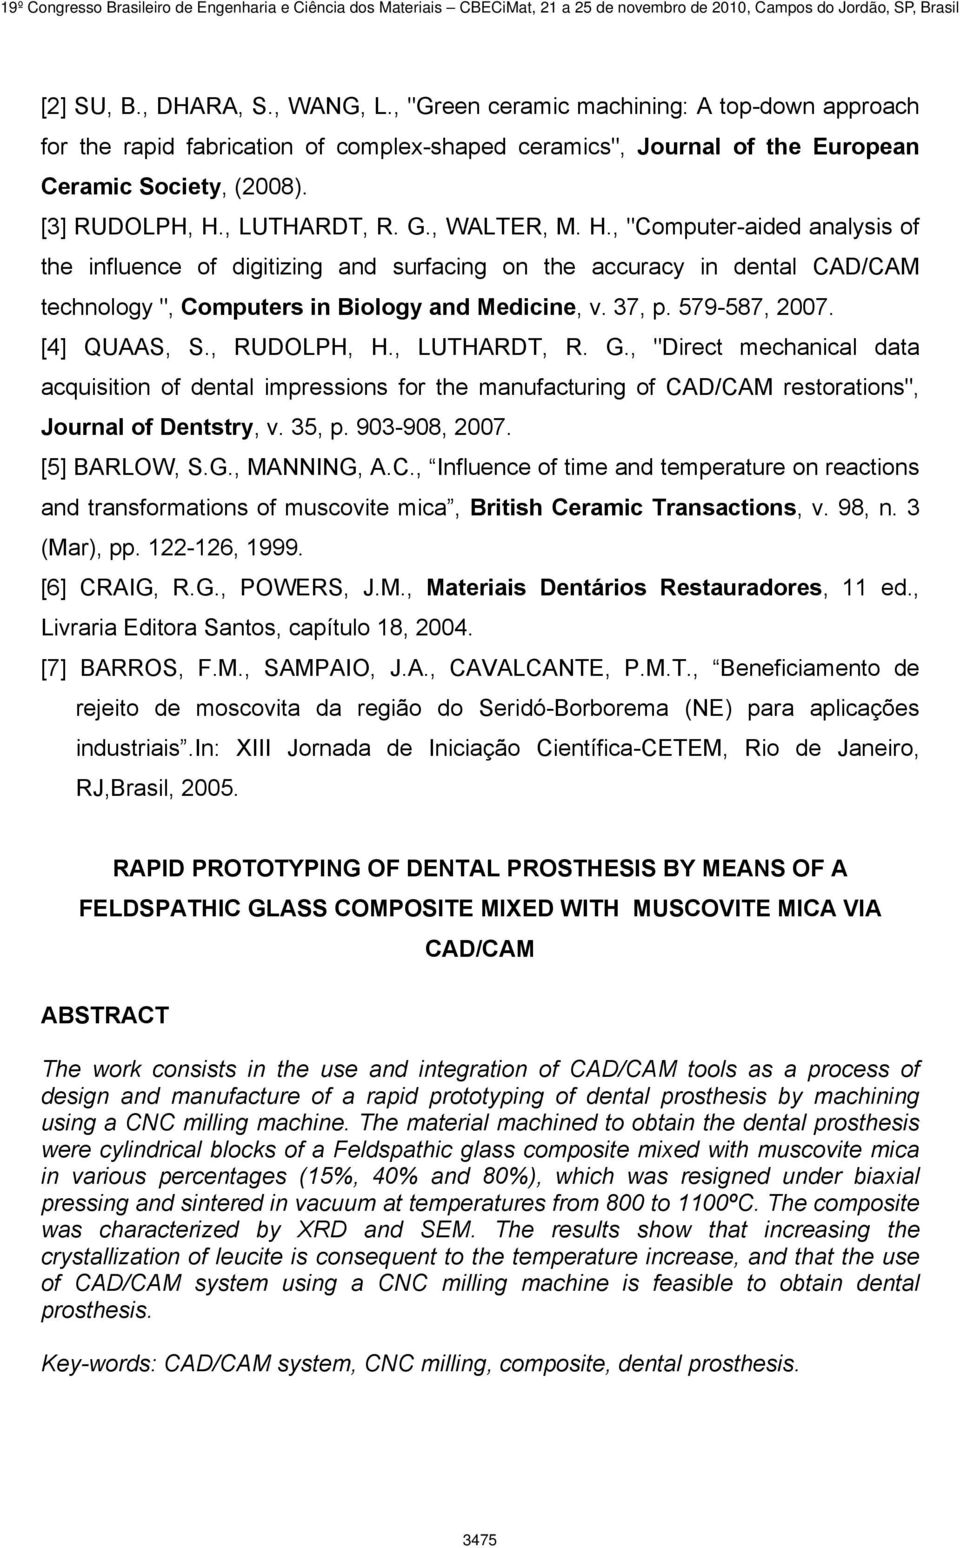 579-587, 2007. [4] QUAAS, S., RUDOLPH, H., LUTHARDT, R. G., "Direct mechanical data acquisition of dental impressions for the manufacturing of CAD/CAM restorations", Journal of Dentstry, v. 35, p.